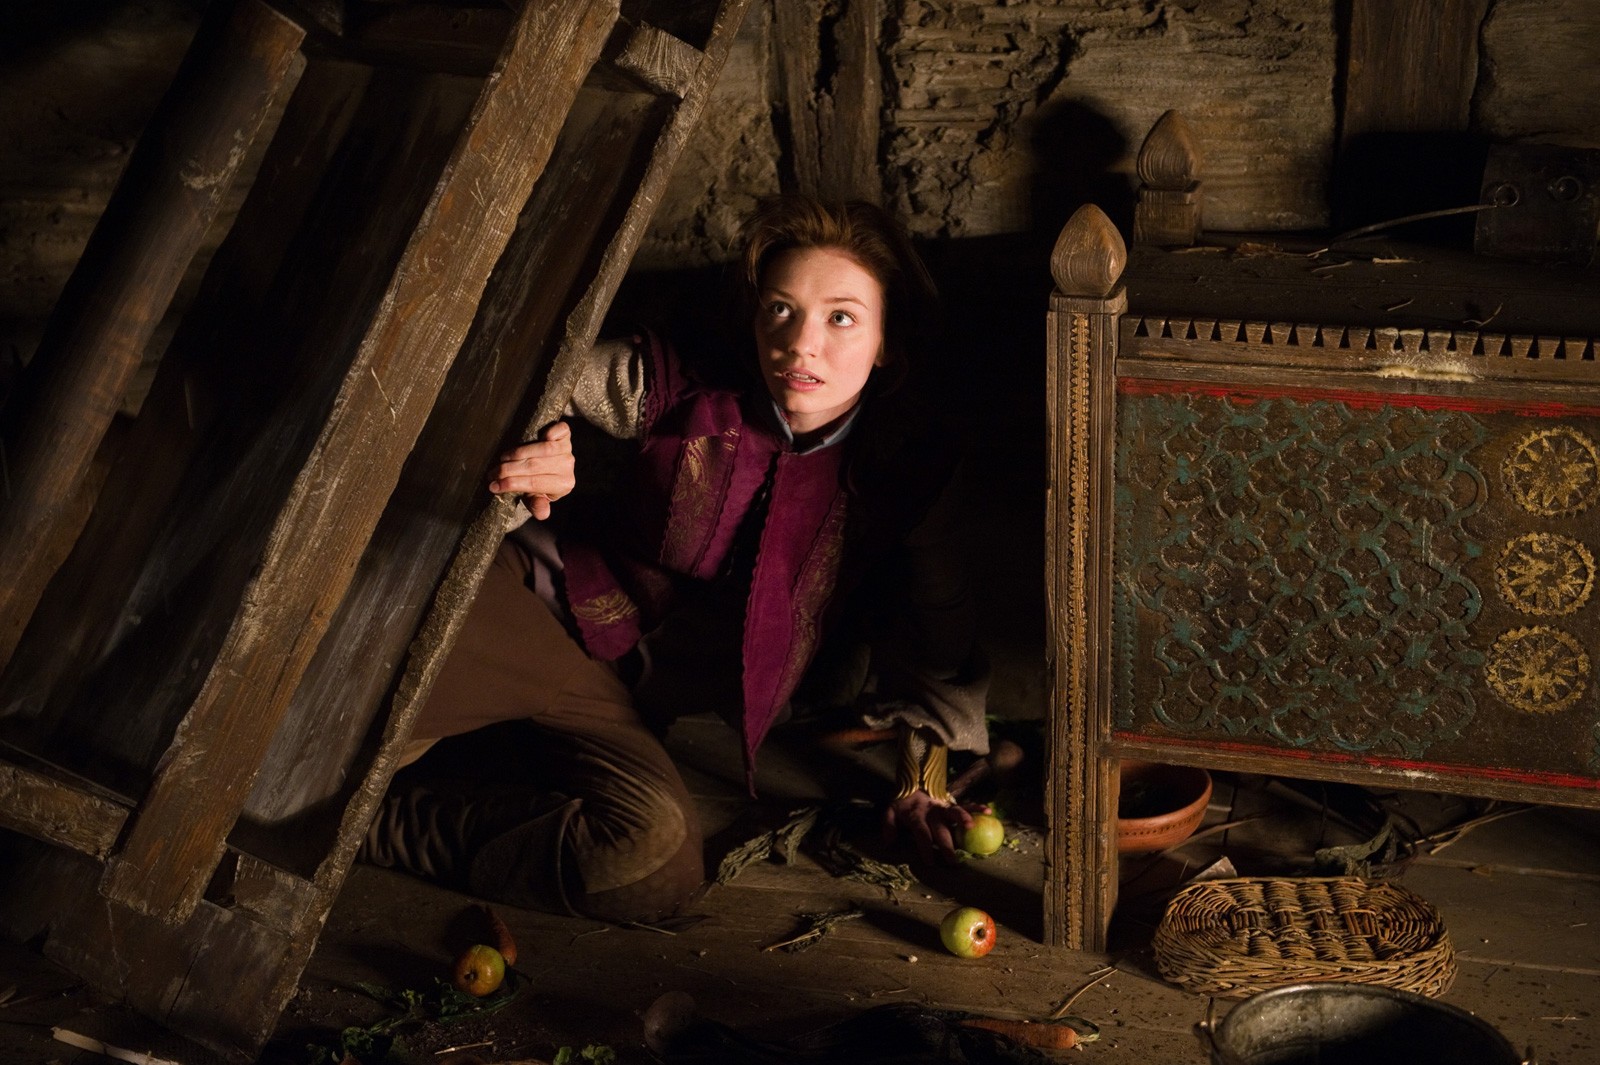 Eleanor Tomlinson stars as Princess Isabelle in Warner Bros. Pictures' Jack the Giant Slayer (2013)